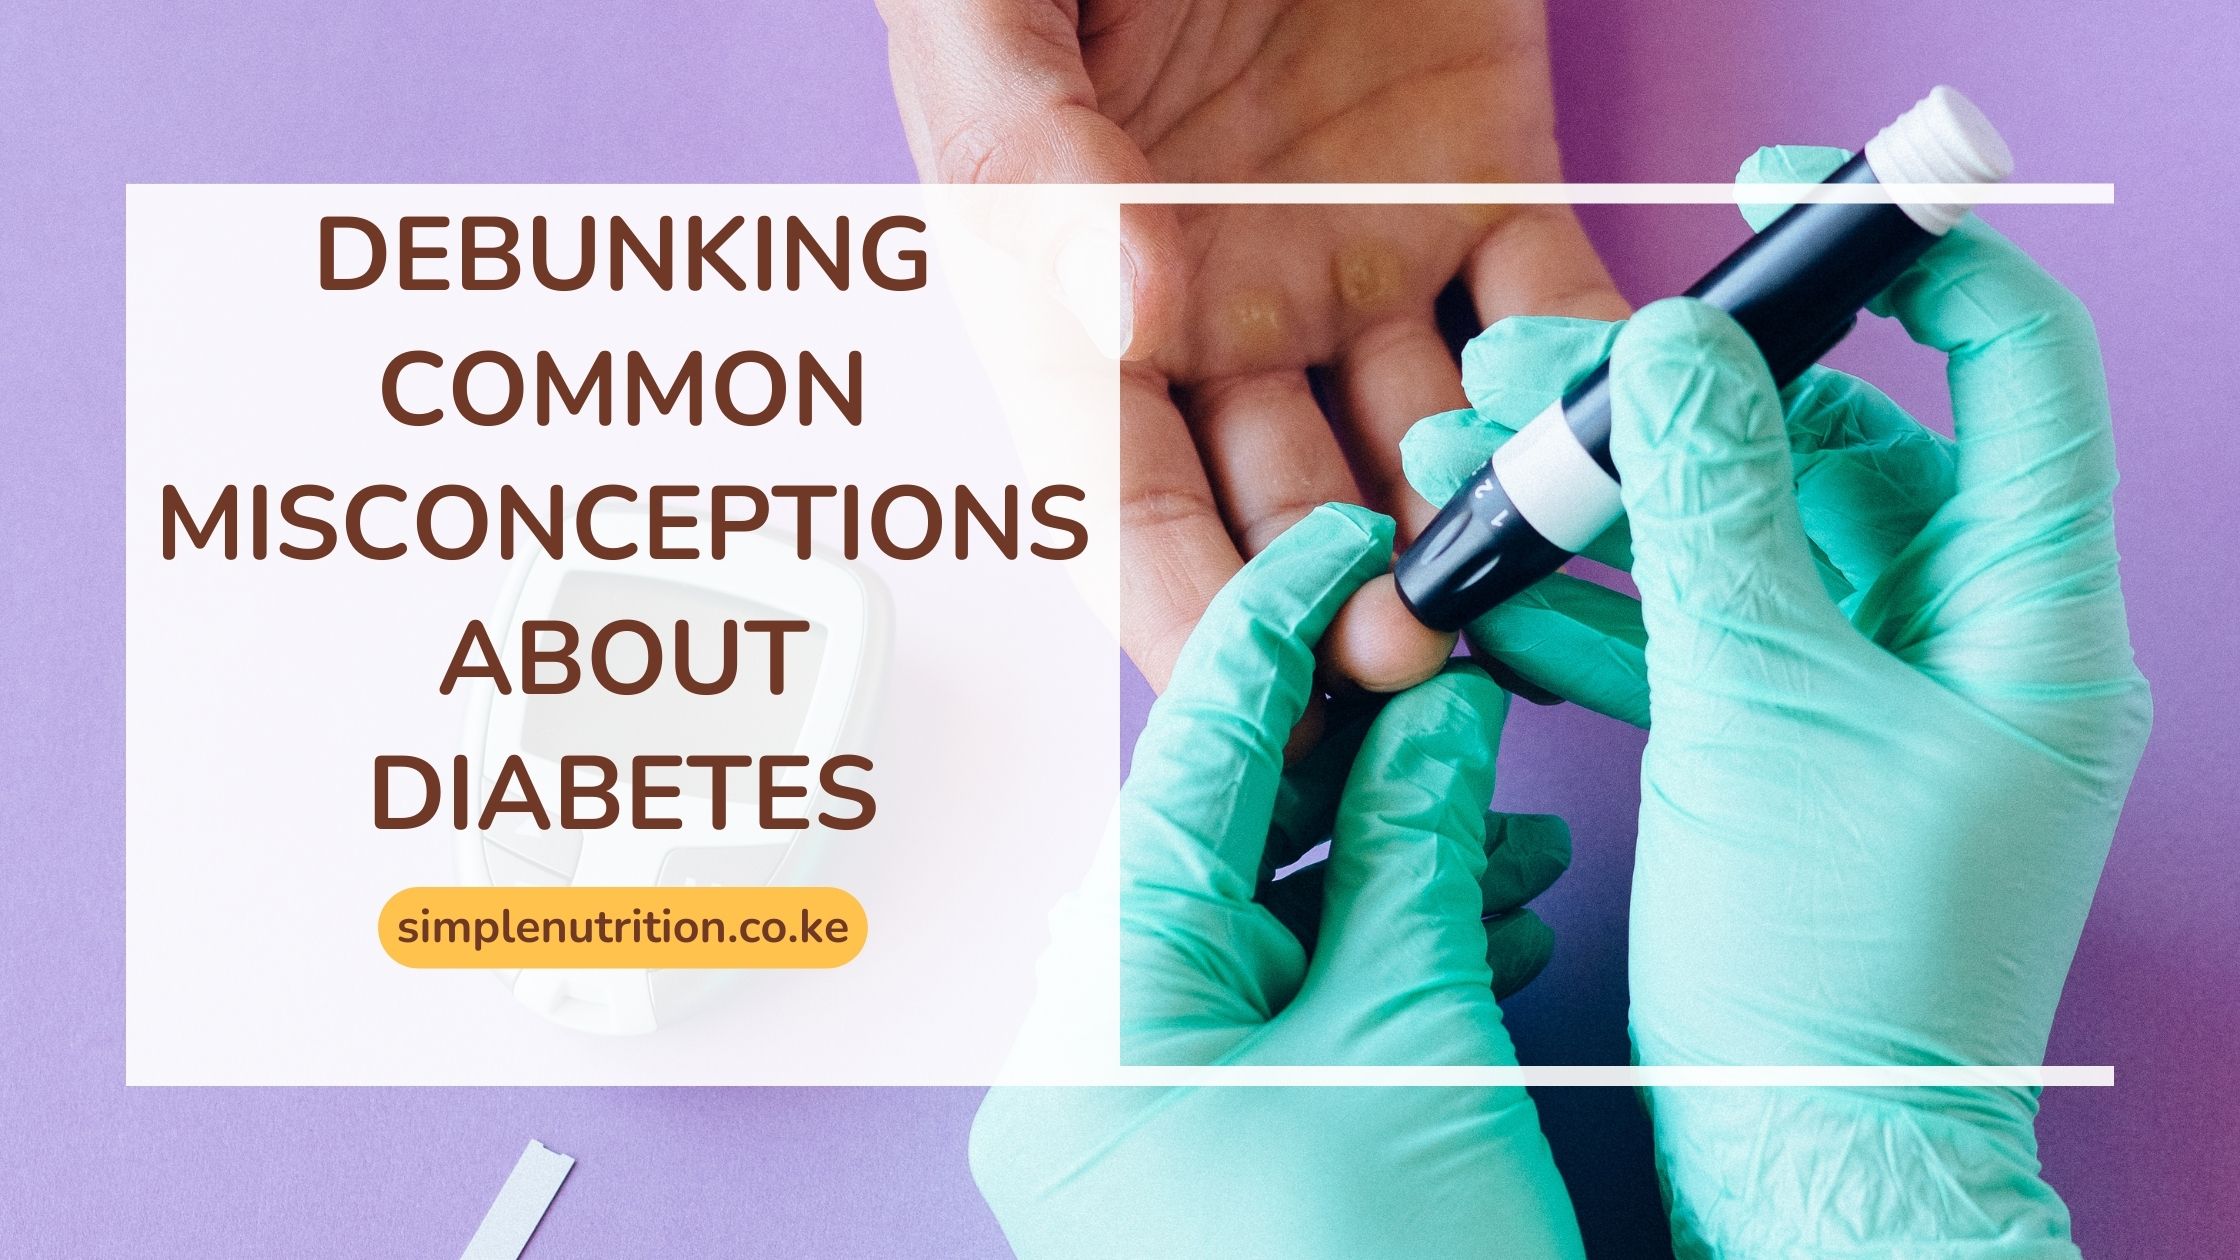 Debunking Myths and Misconceptions about Diabetes.